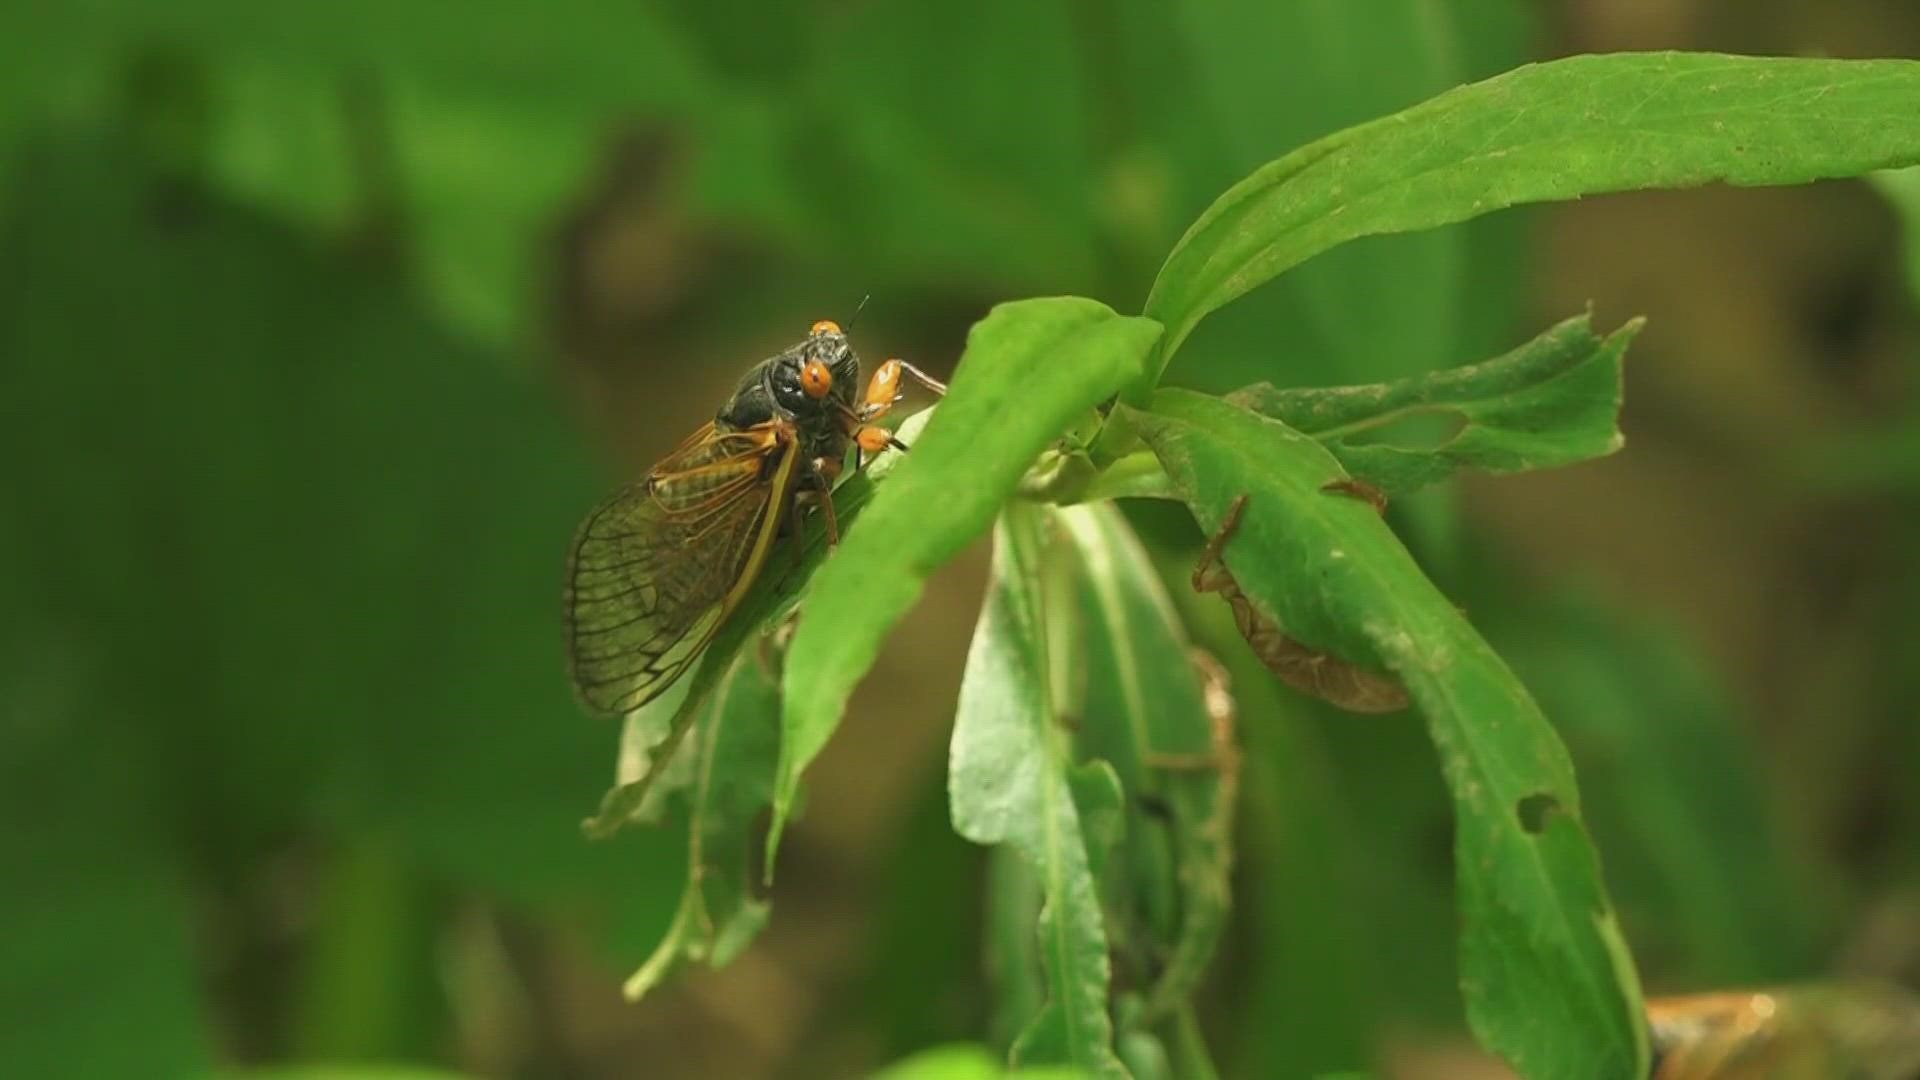 The cicadas that fill summer nights in East Tennessee with buzzing aren't always ones from Brood X.